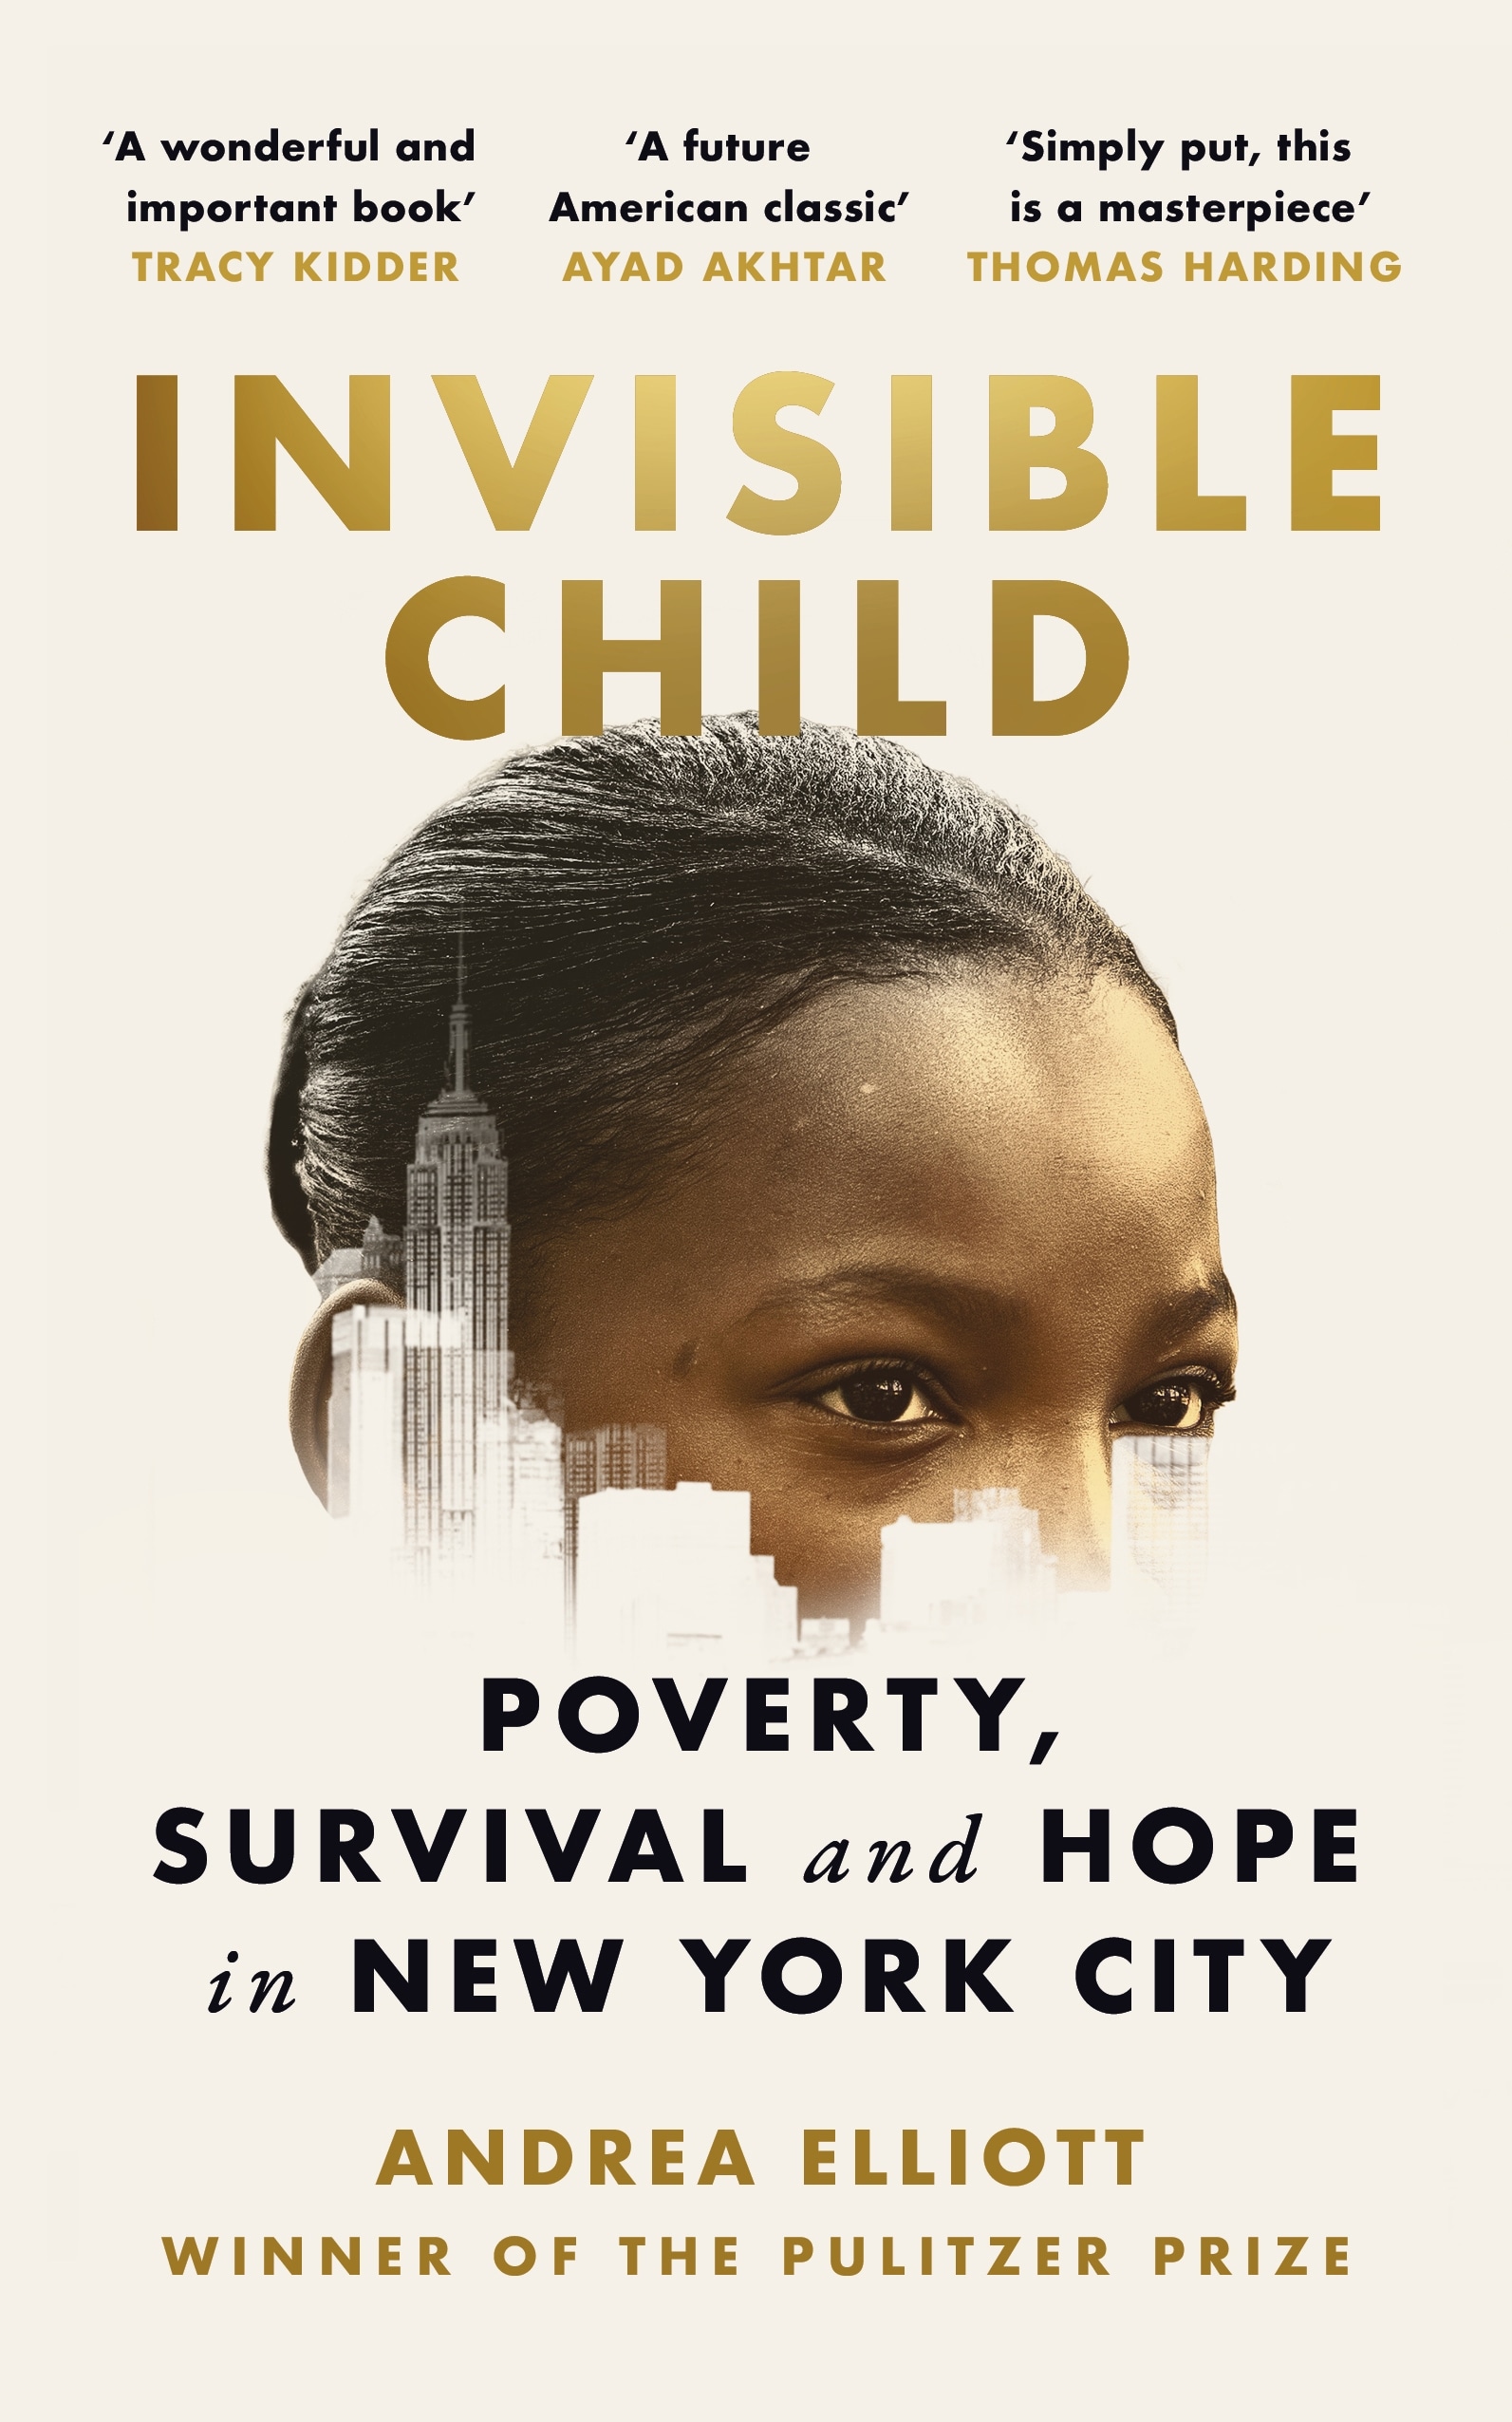 Book “Invisible Child” by Andrea Elliott — January 27, 2022